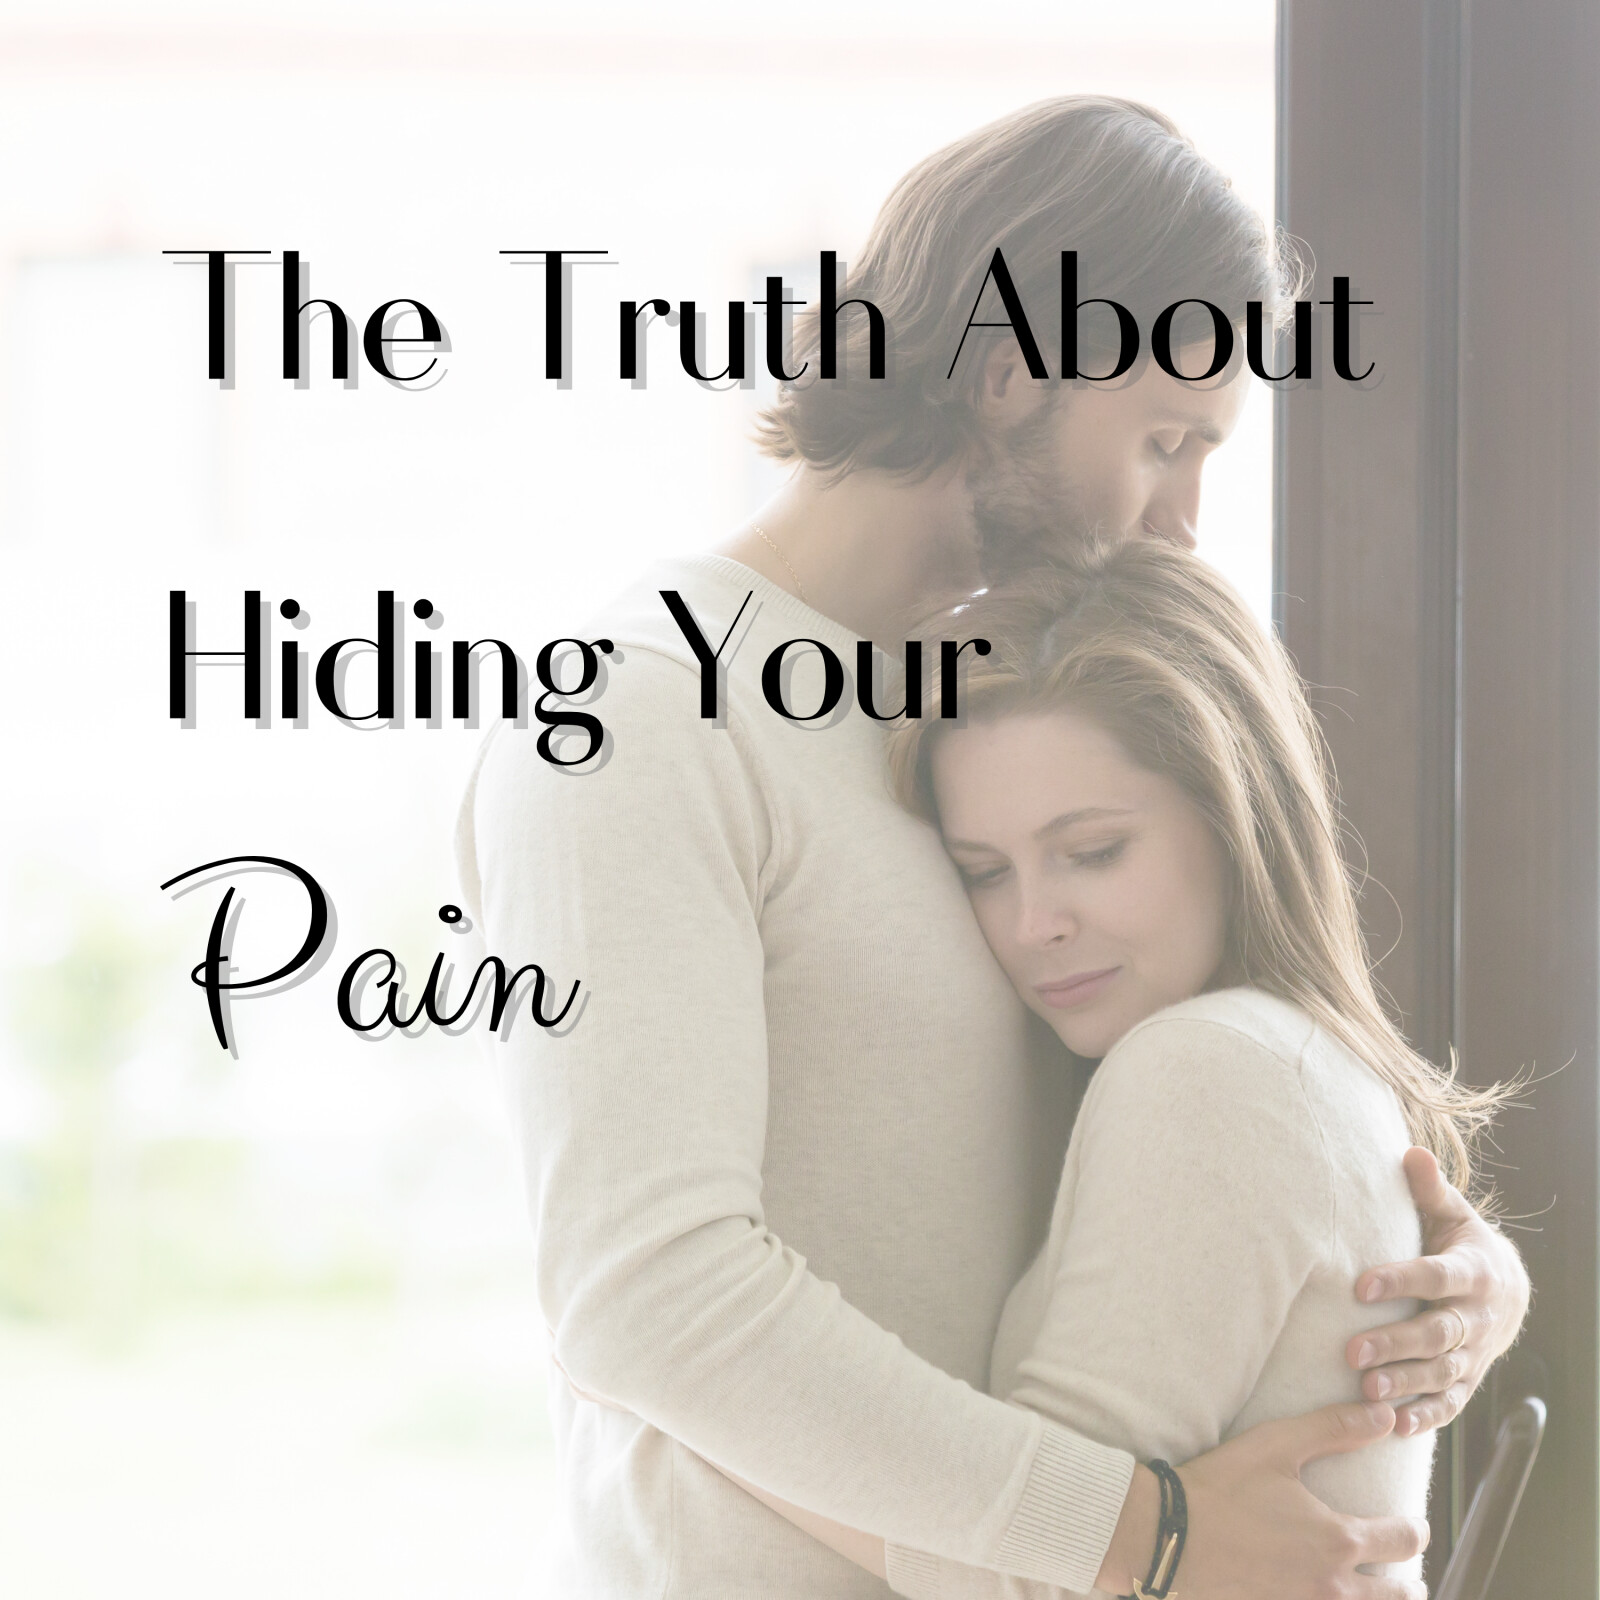 The truth about hiding your pain...